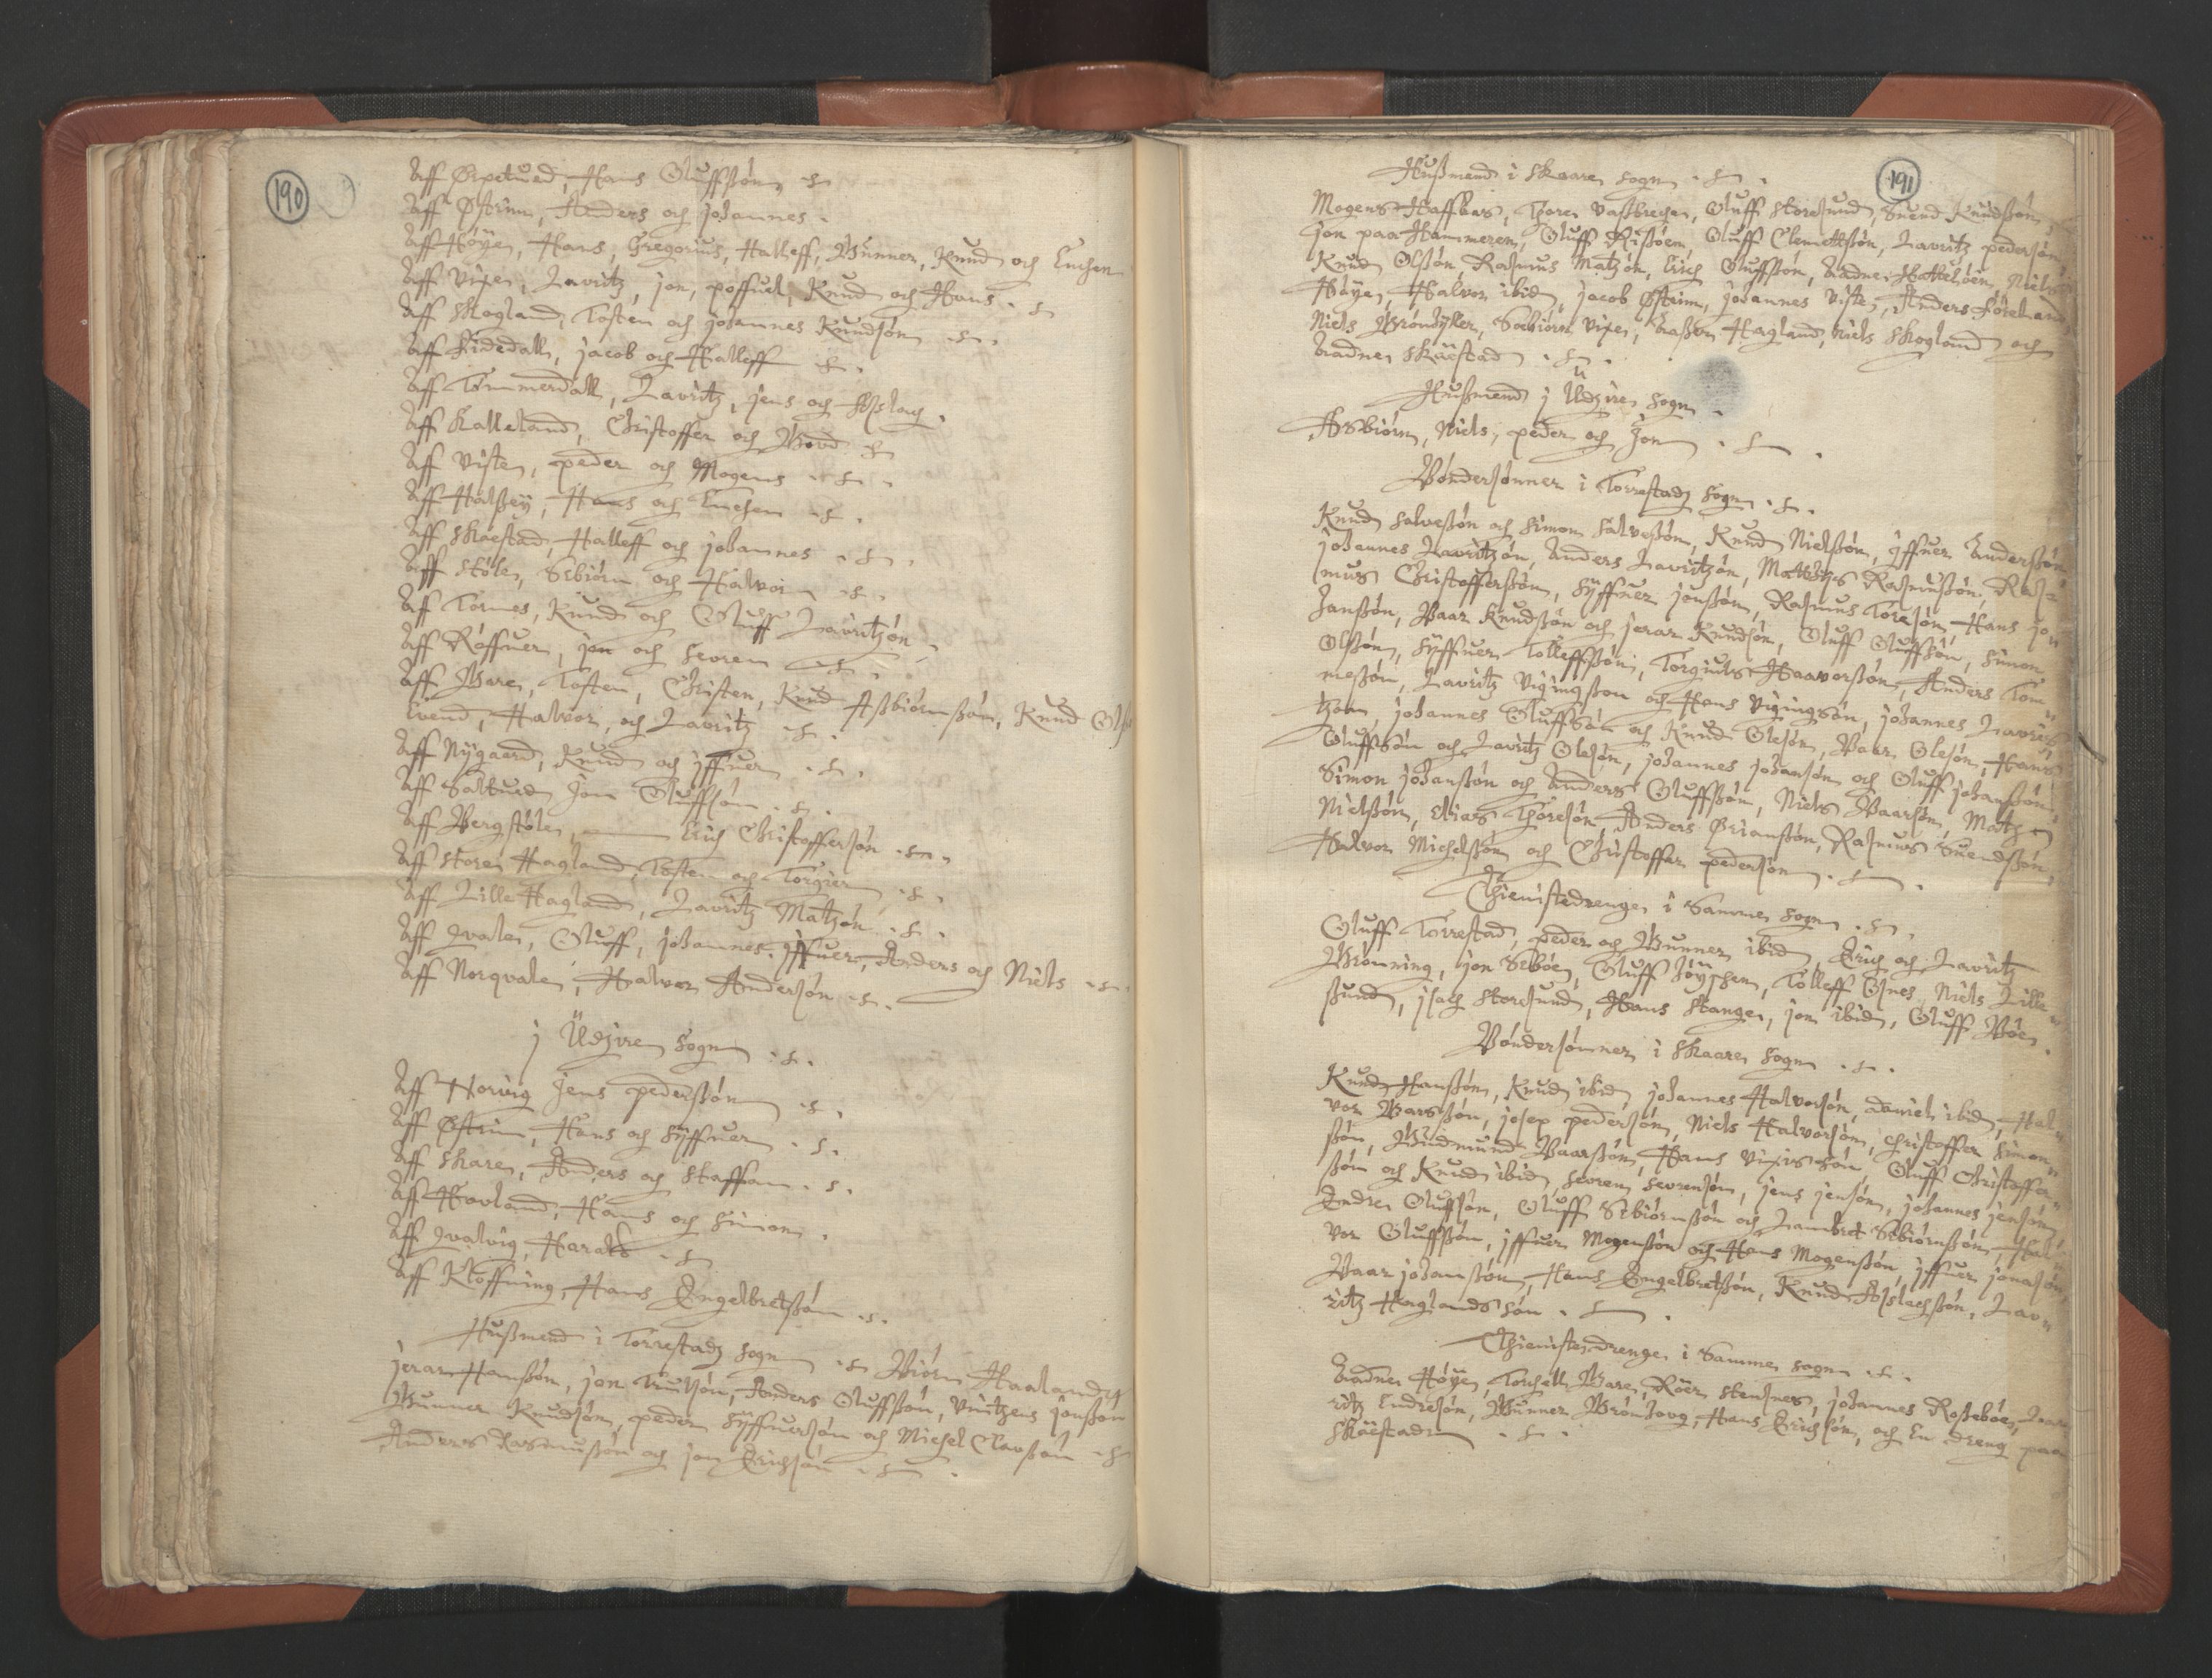 RA, Vicar's Census 1664-1666, no. 18: Stavanger deanery and Karmsund deanery, 1664-1666, p. 190-191